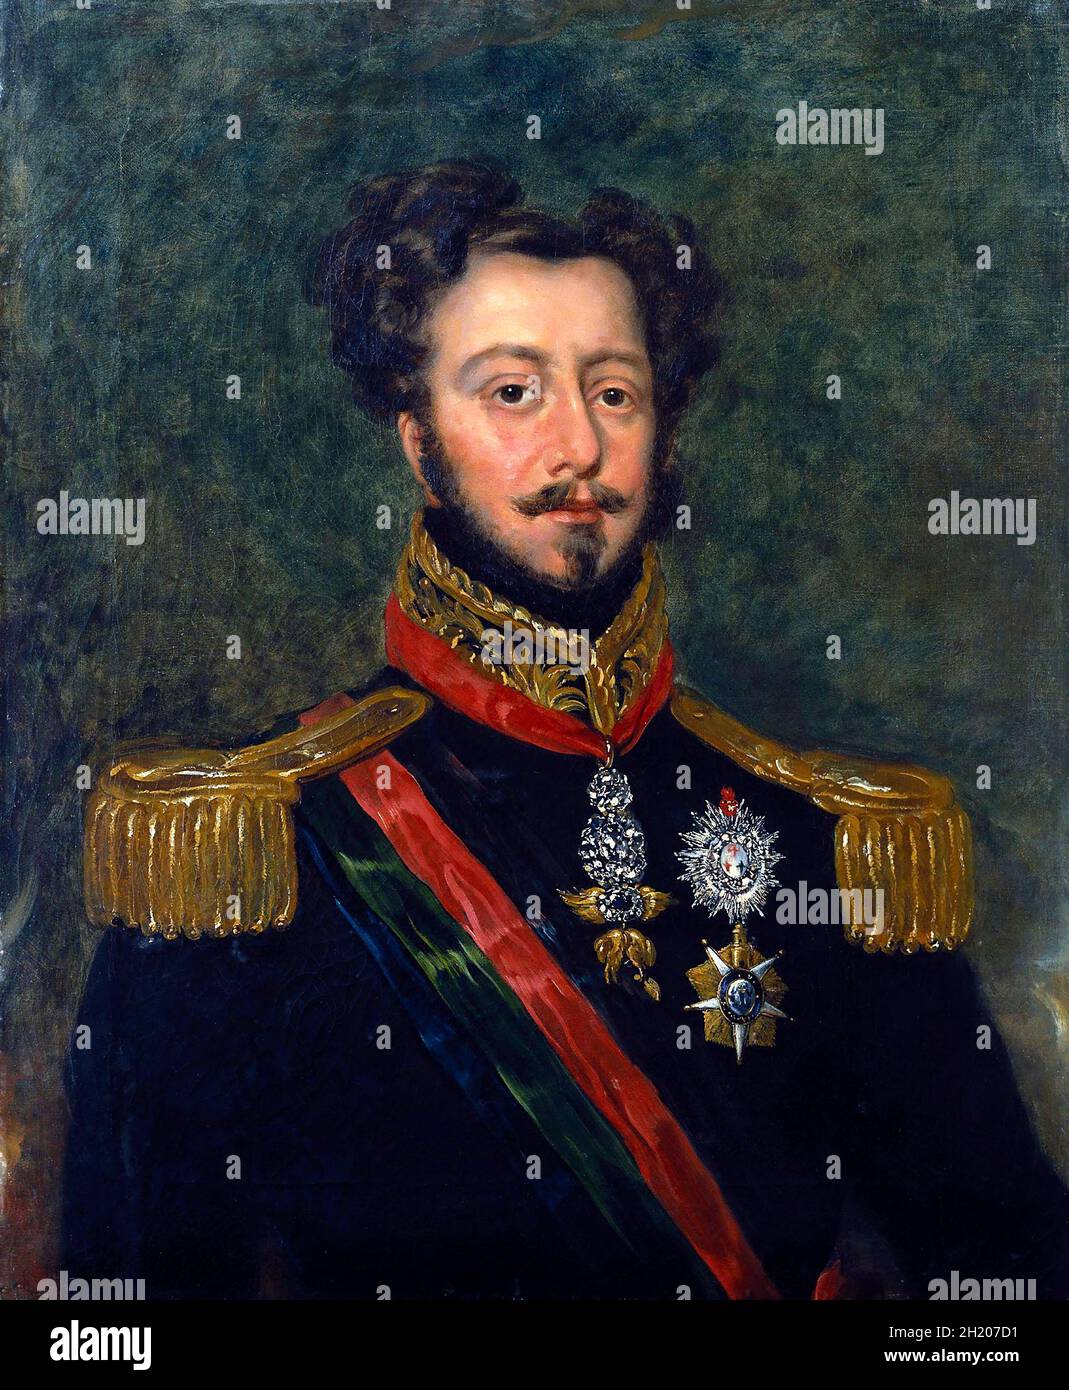 Dom Pedro I of Brazil (Dom Pedro IV of Portugal - 1798-1834) by John Simpson, oil on canvas, 1834. Pedro I was the founder and first ruler of the Empire of Brazil. Stock Photo